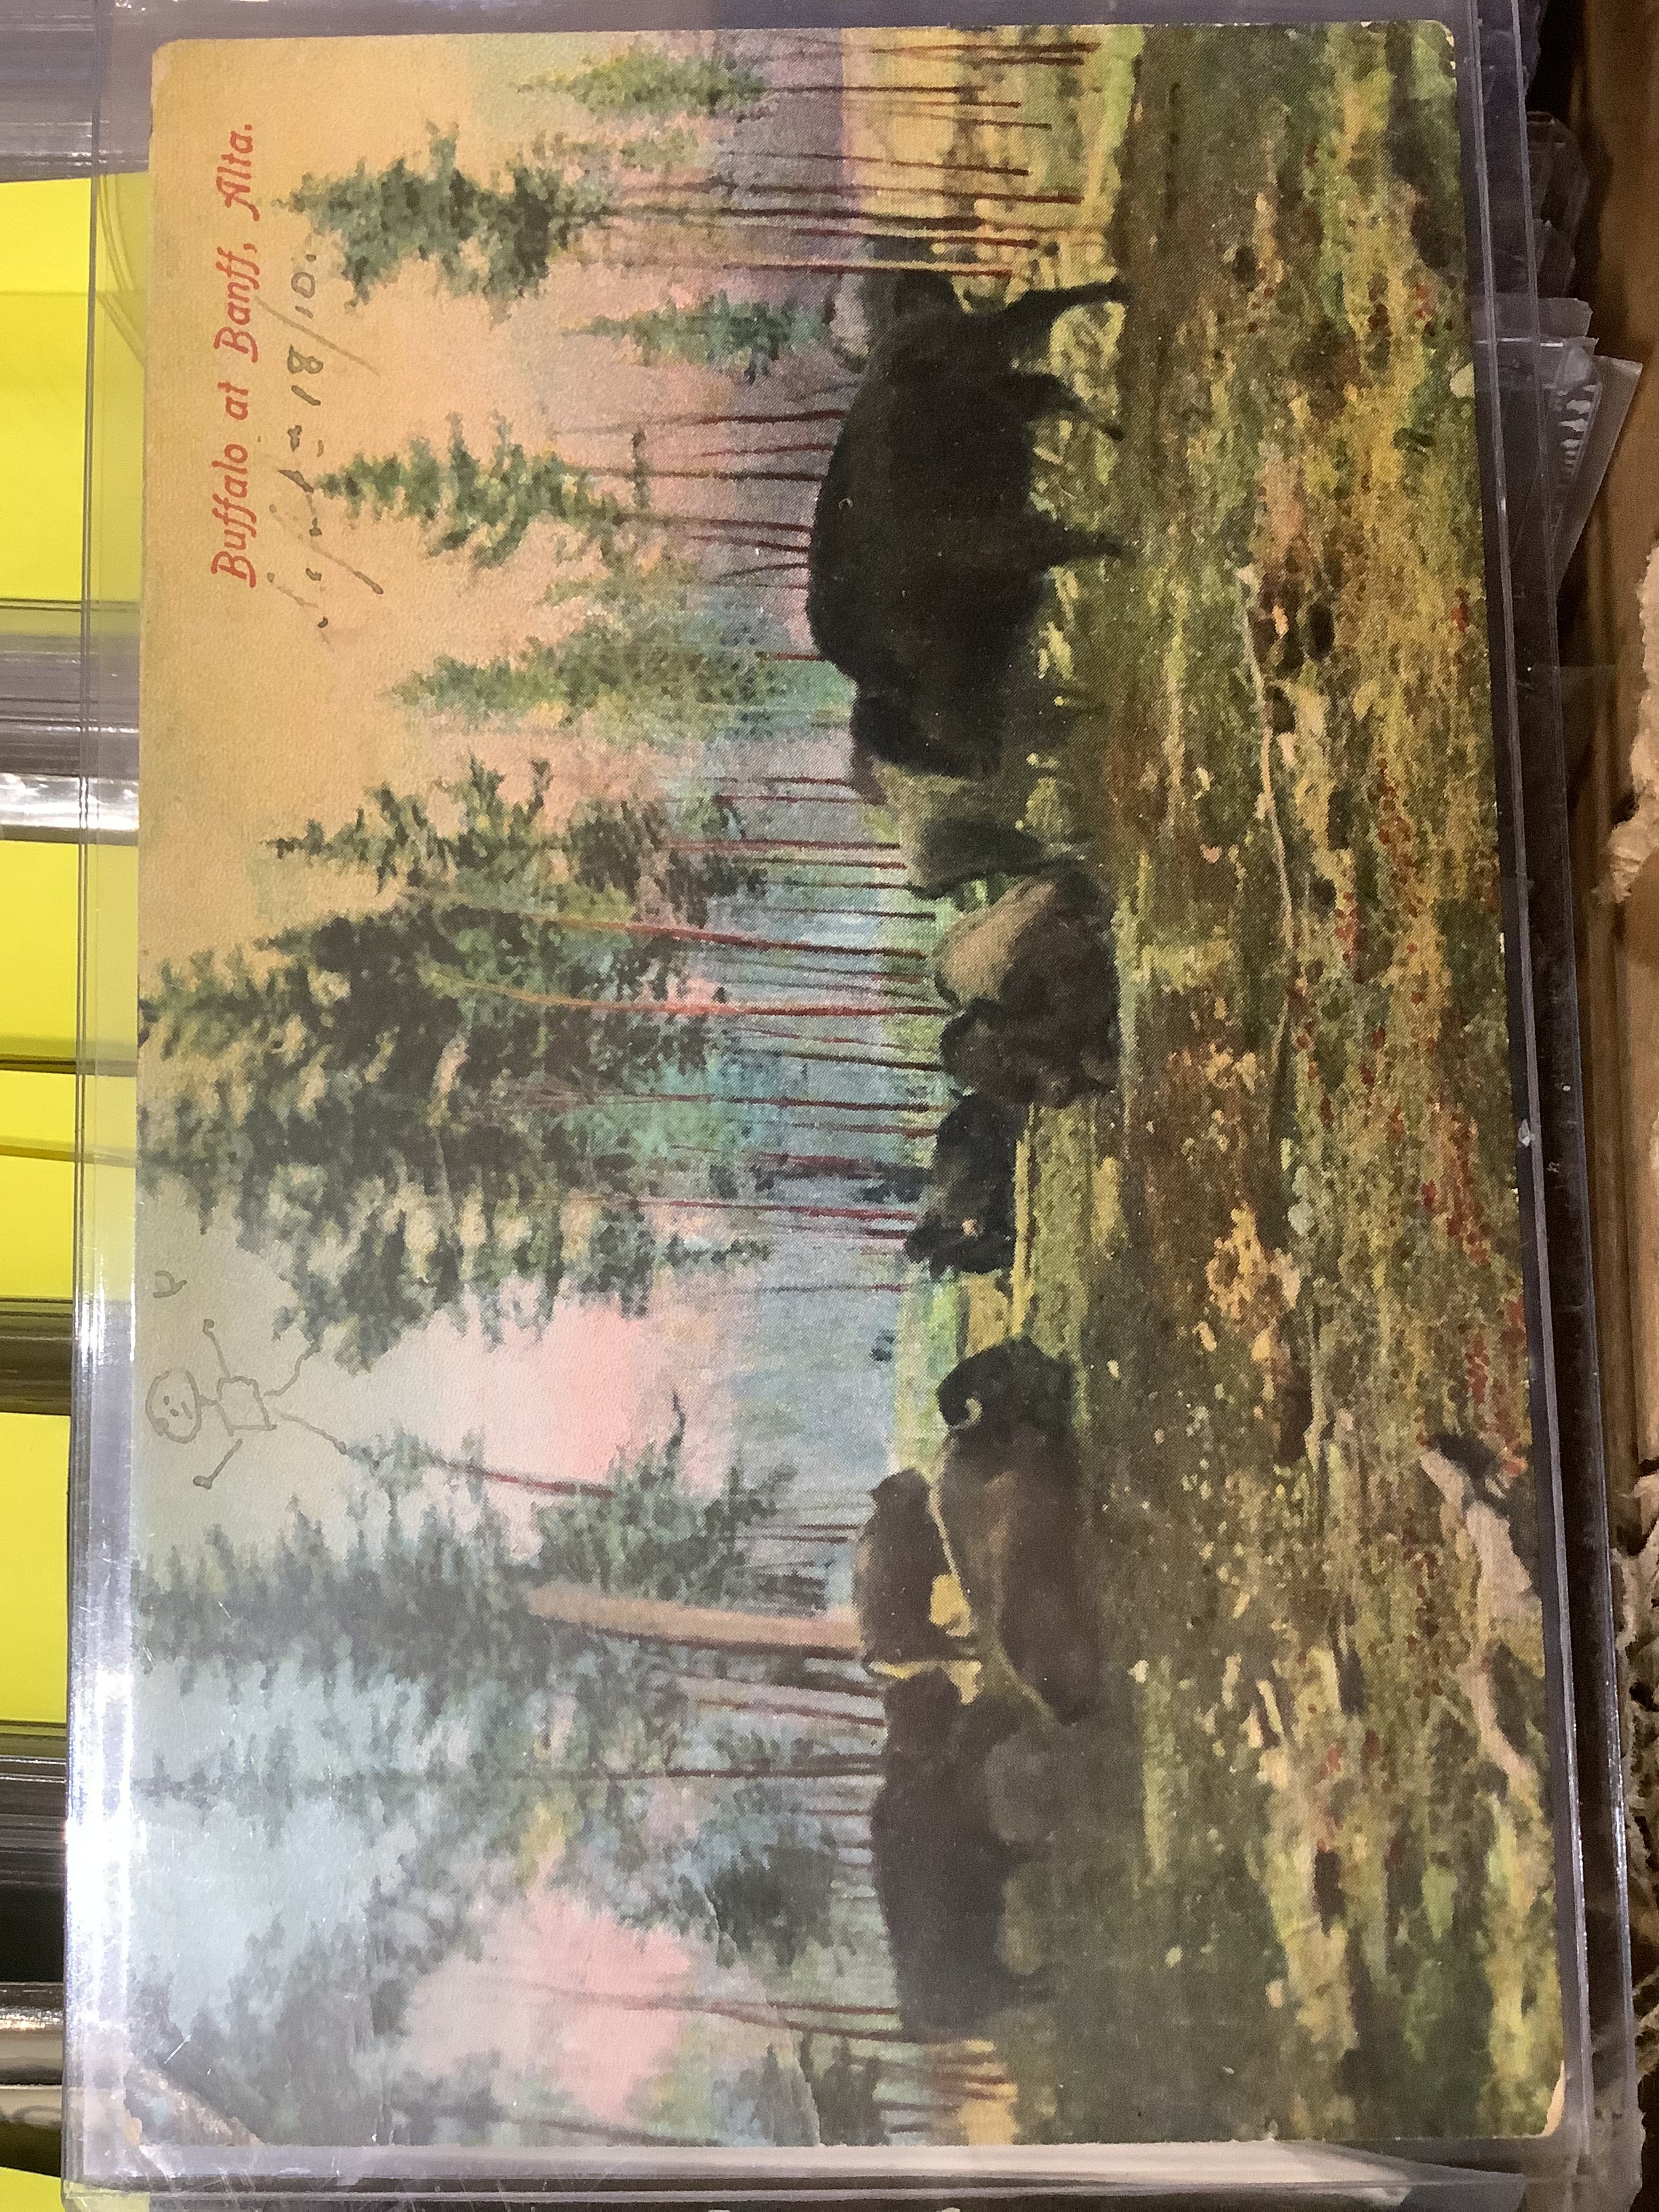 The "Collection - historic bison and bison related postcards